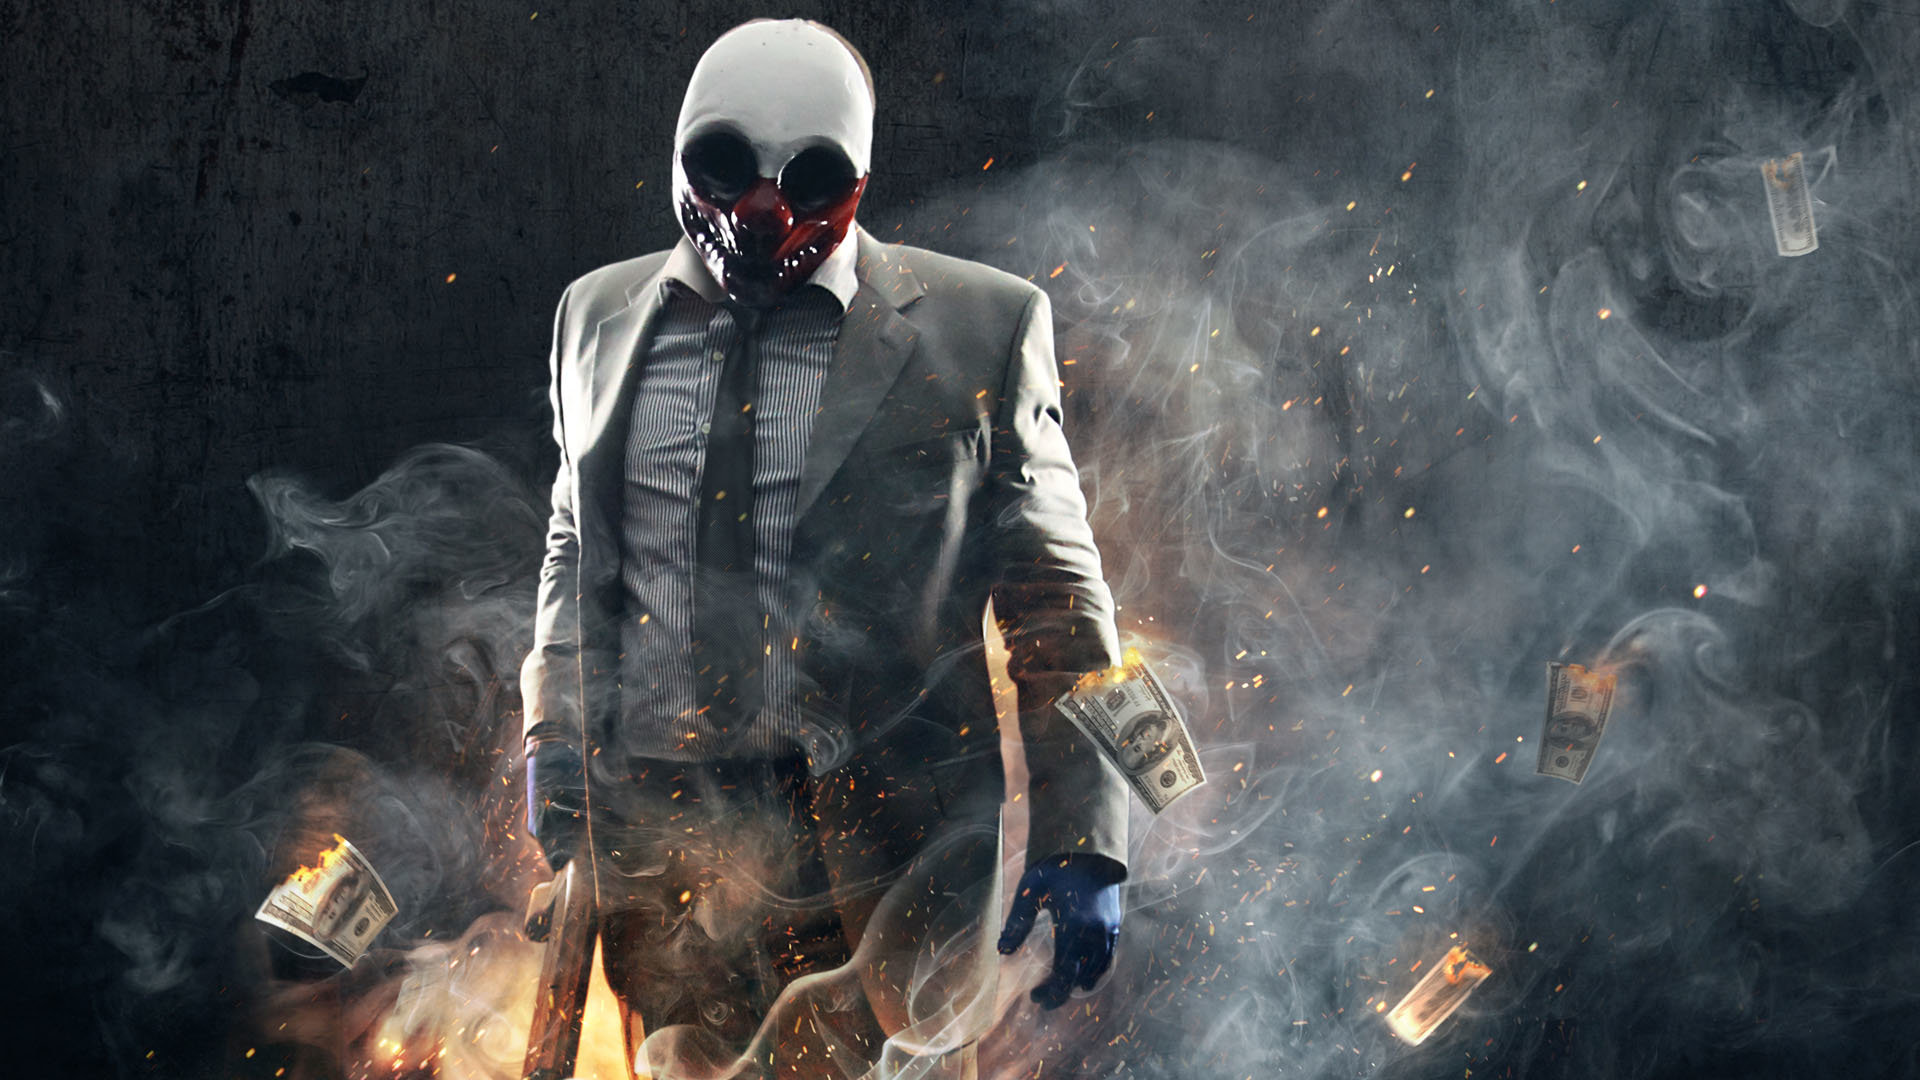 payday 2 wallpaper hd,pc game,personal protective equipment,fictional character,batman,headgear